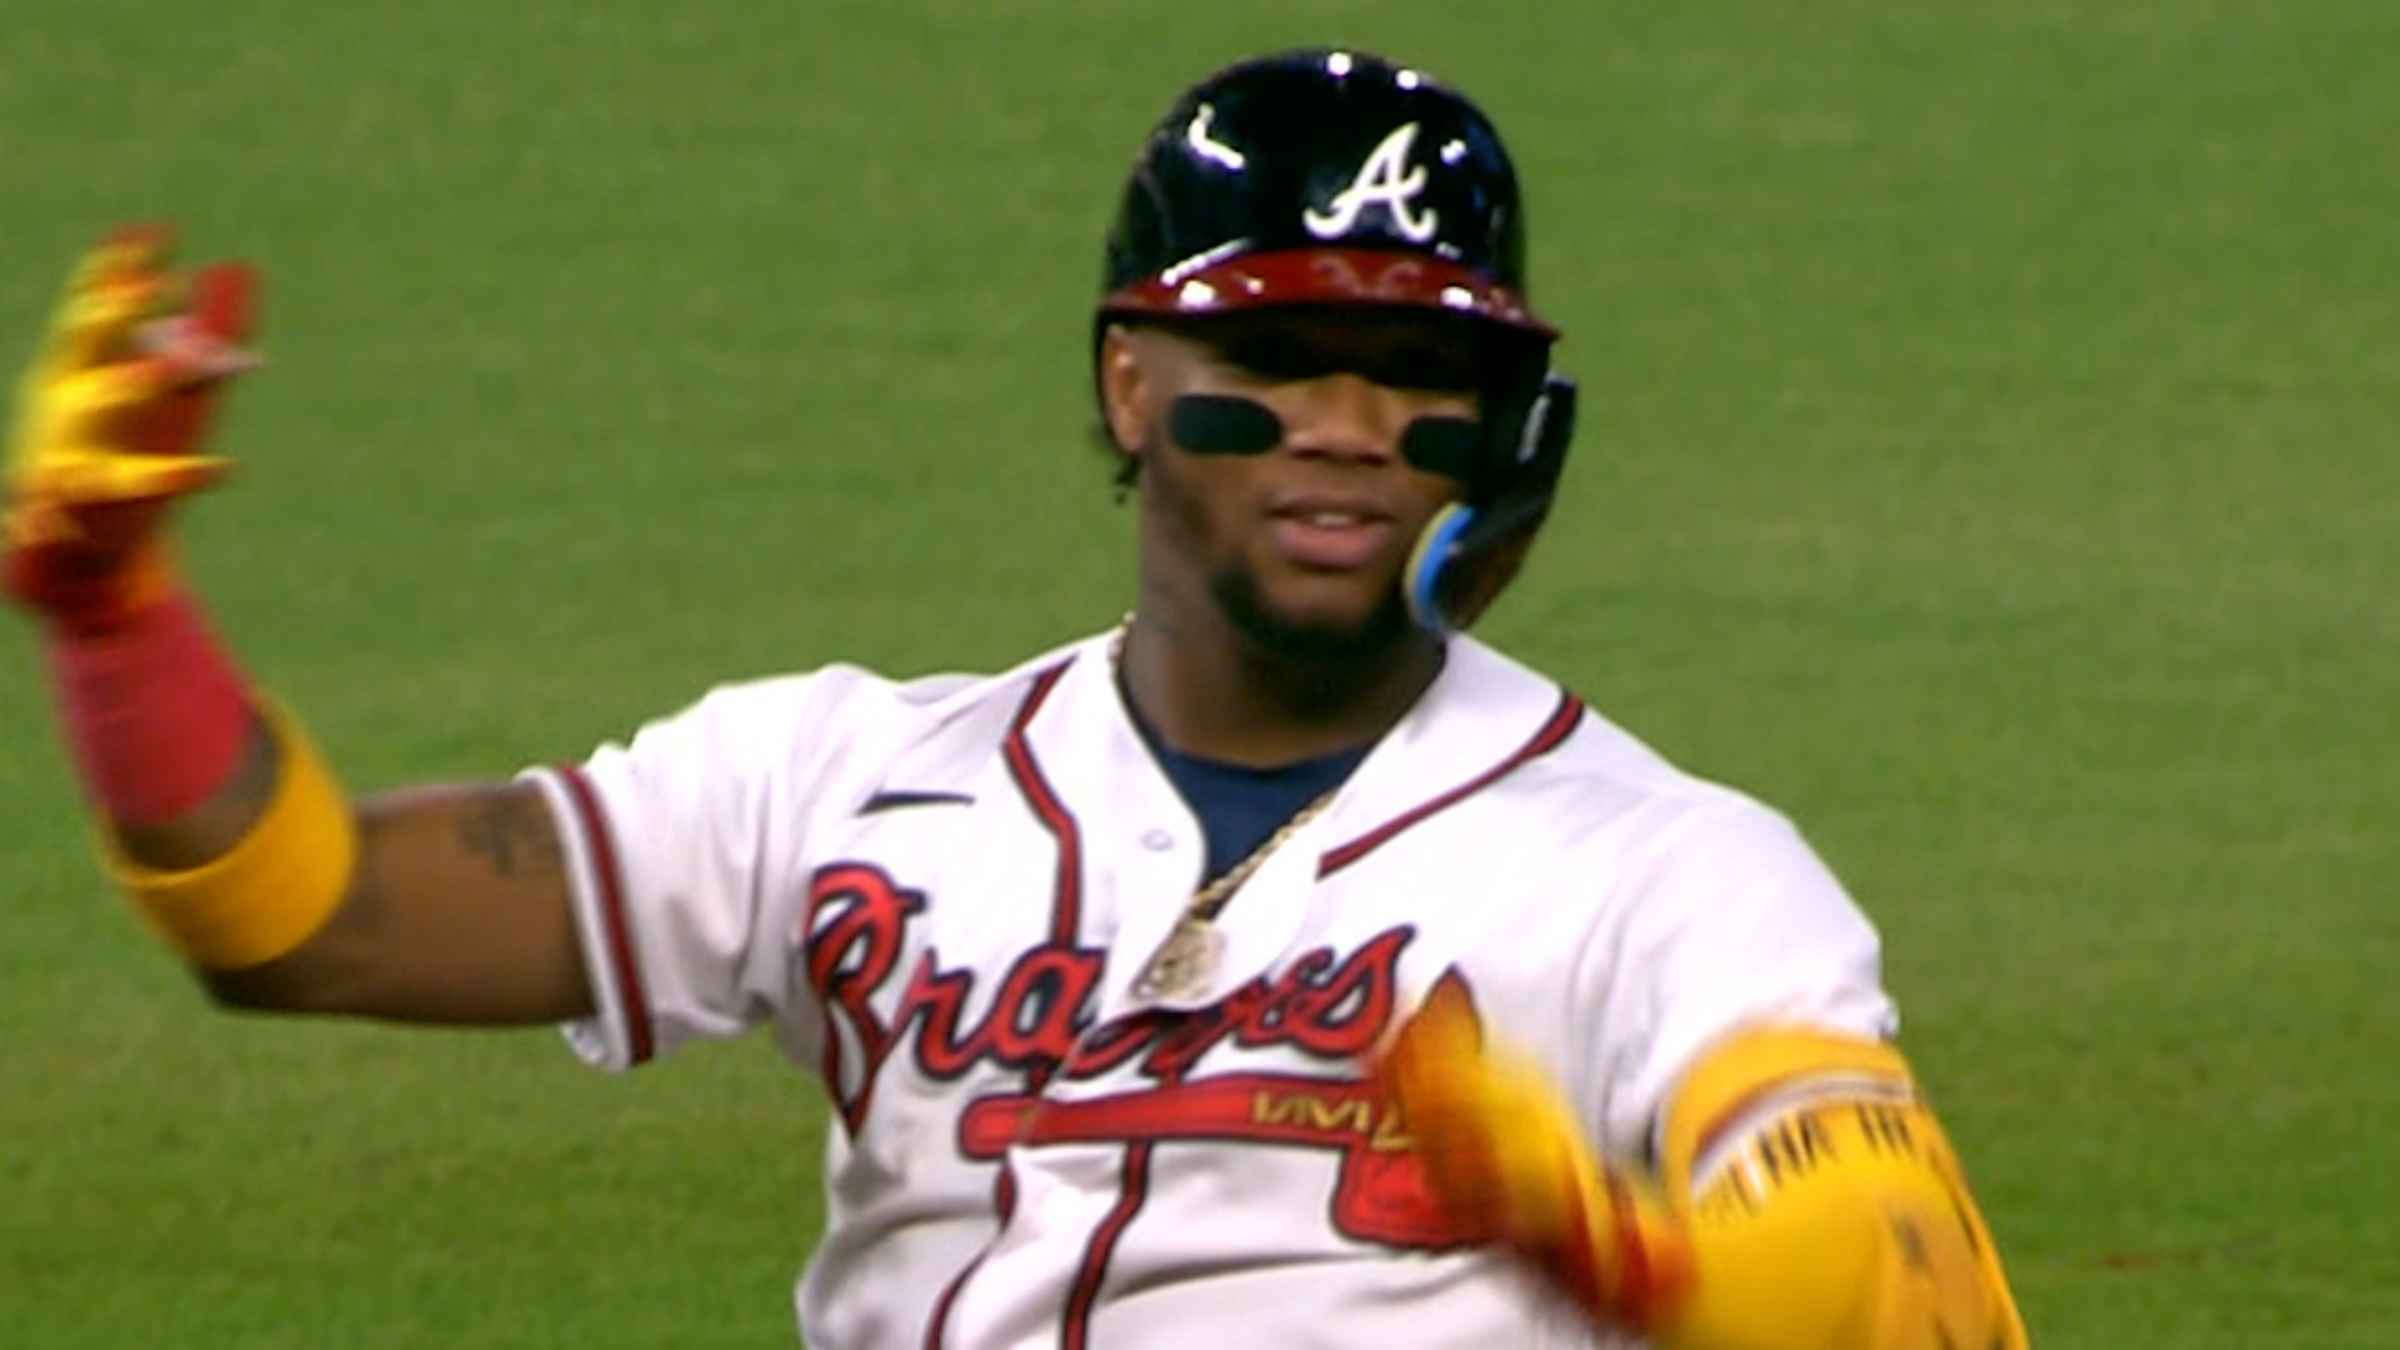 Ronald Acuña Jr. ties game with pinch hit RBI double